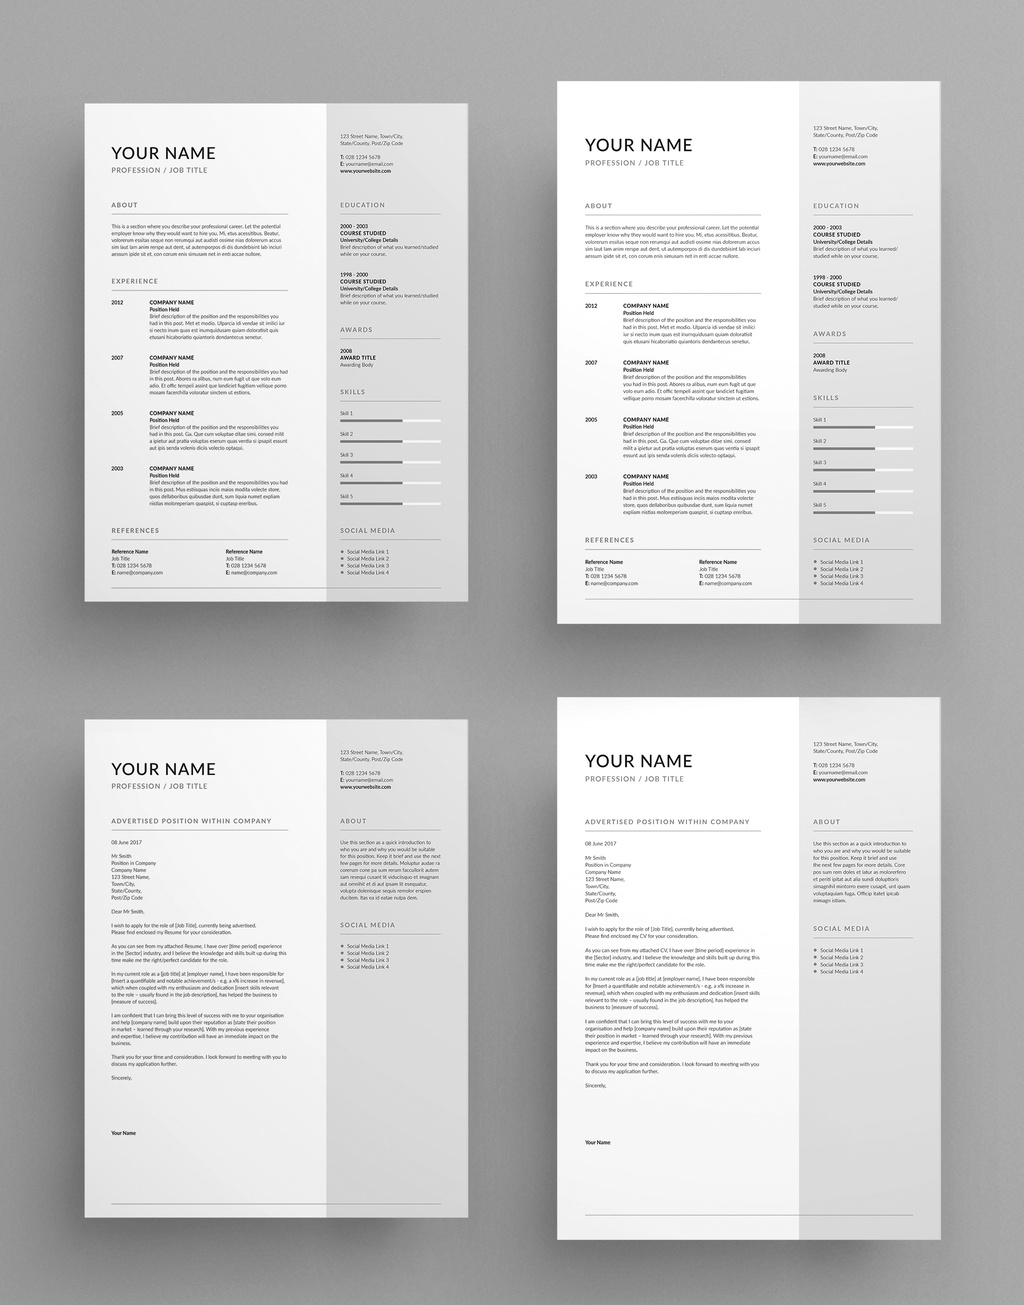 Contemporary resume and cover letter template from Adobe Stock contributor @Bill Mawhinney.